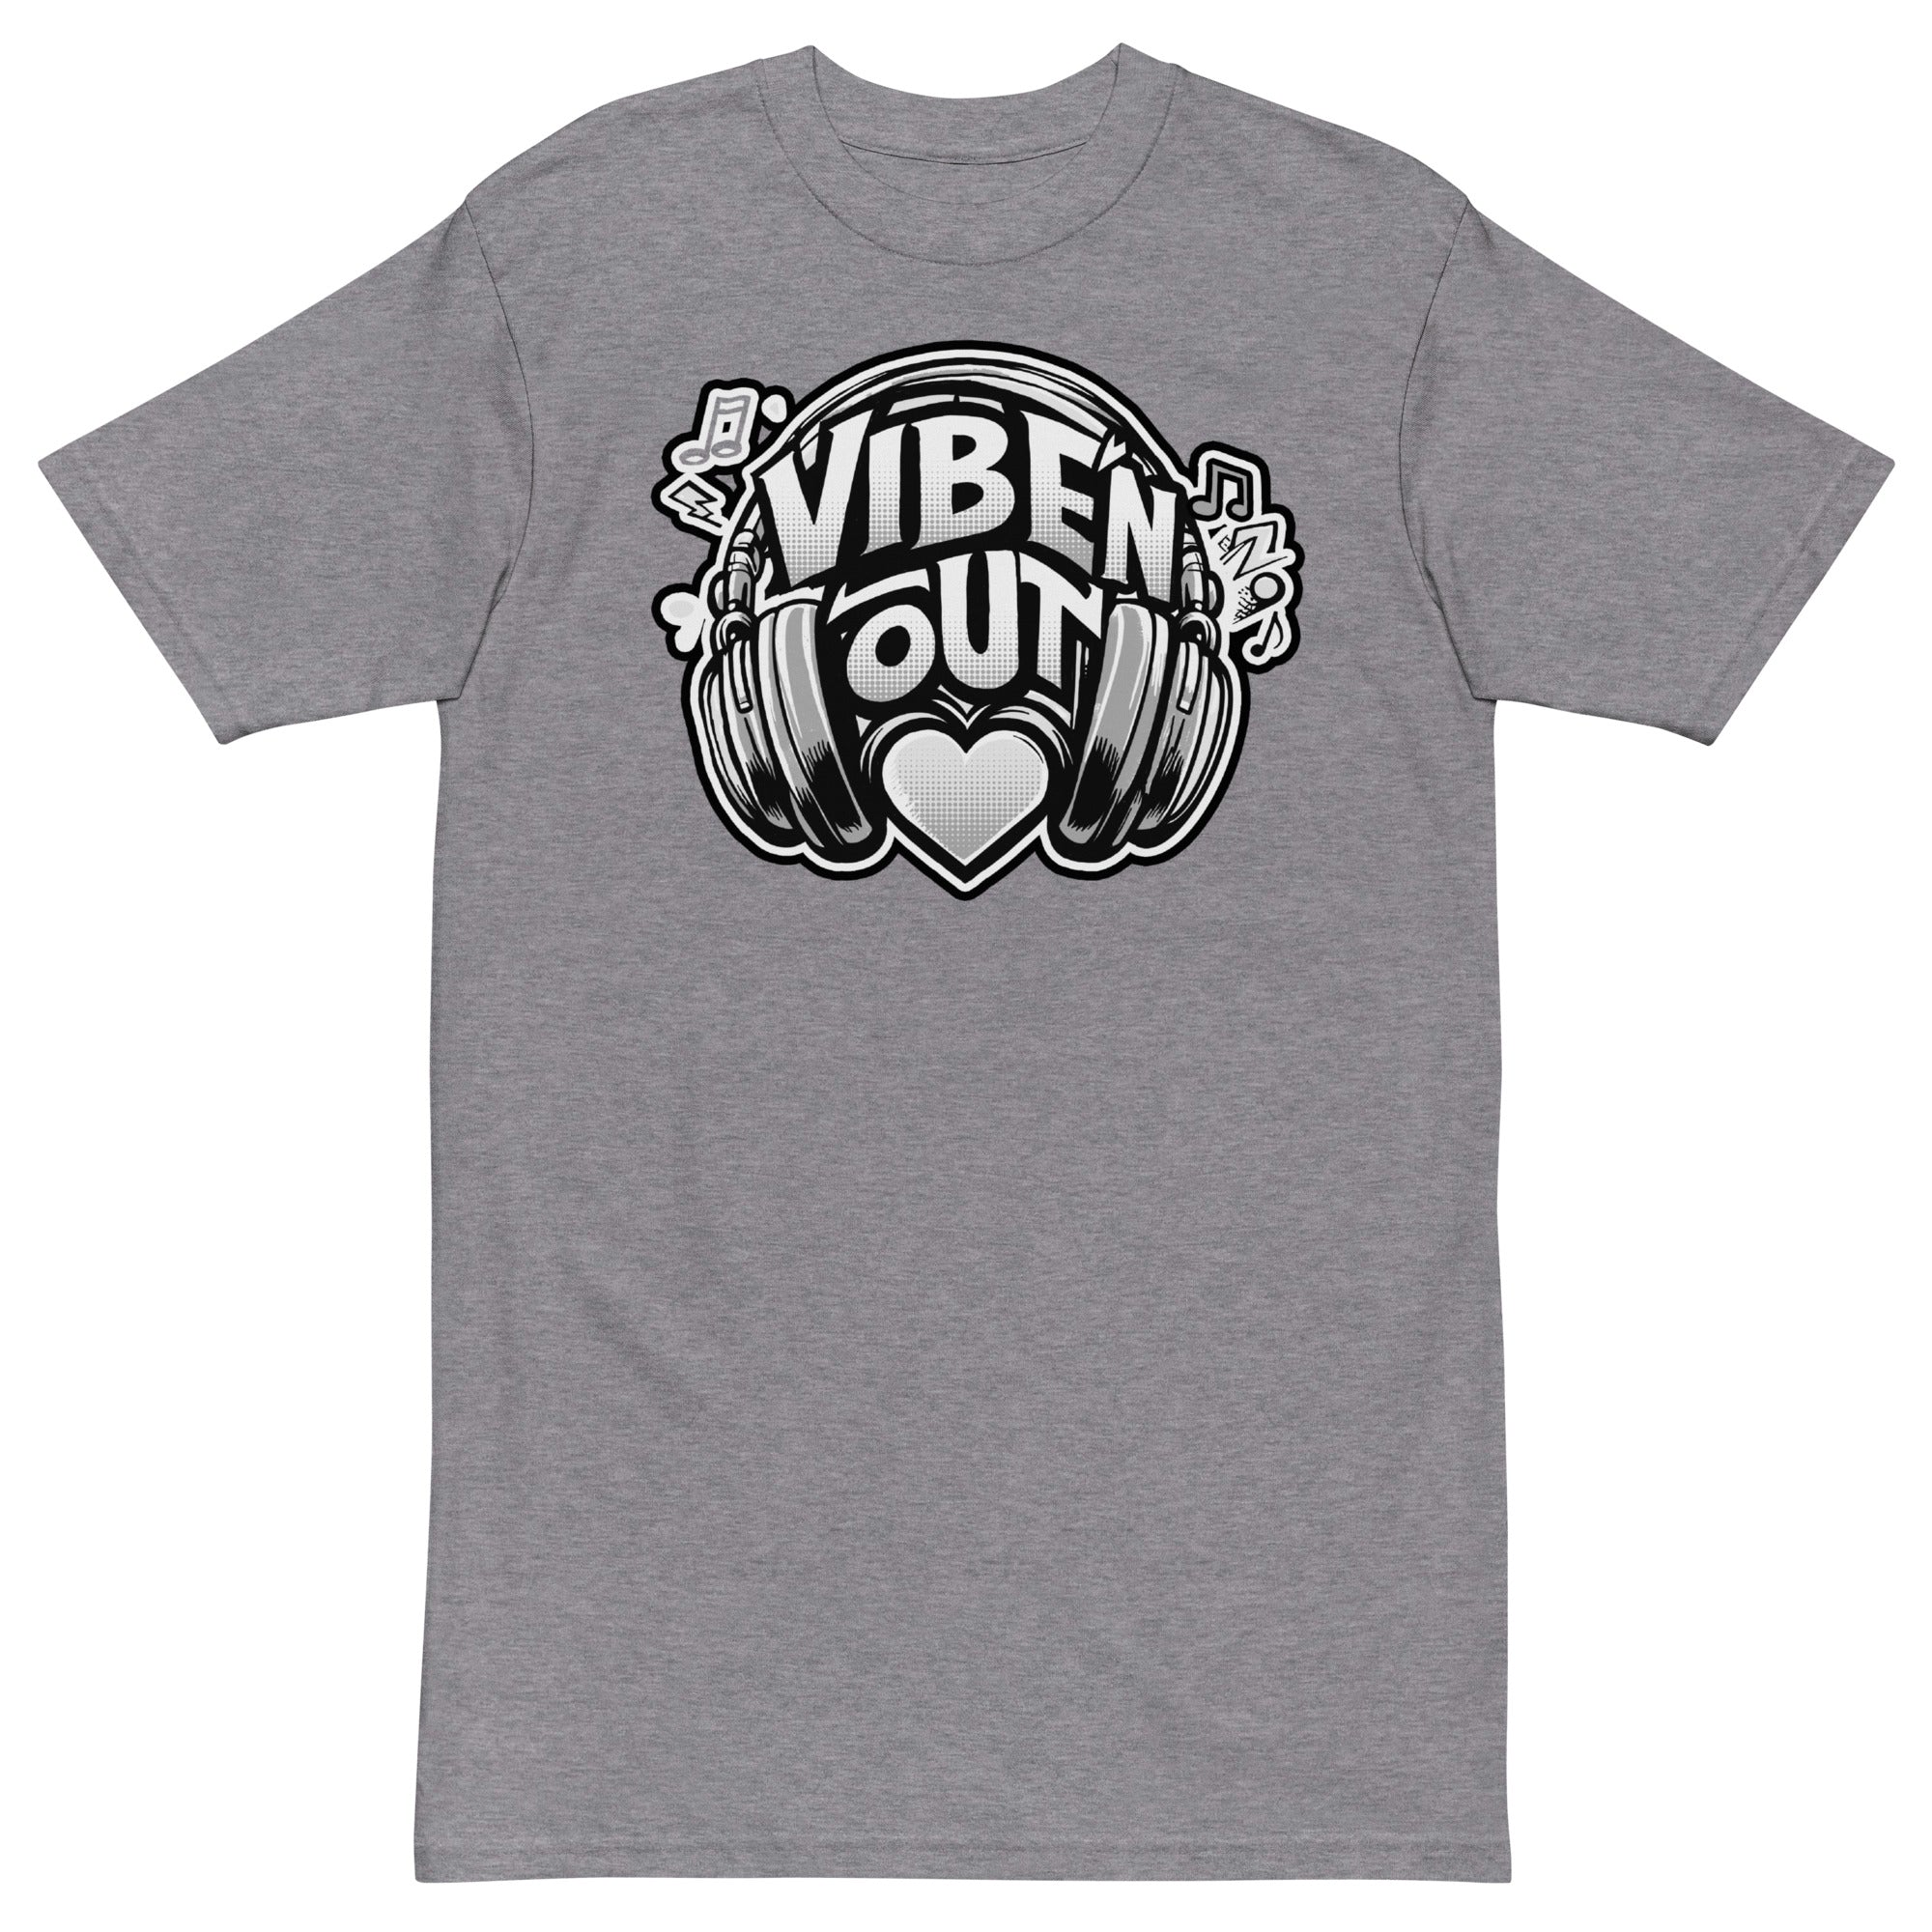 VIBE 'N OUT Black and White Premium Unisex T-Shirt